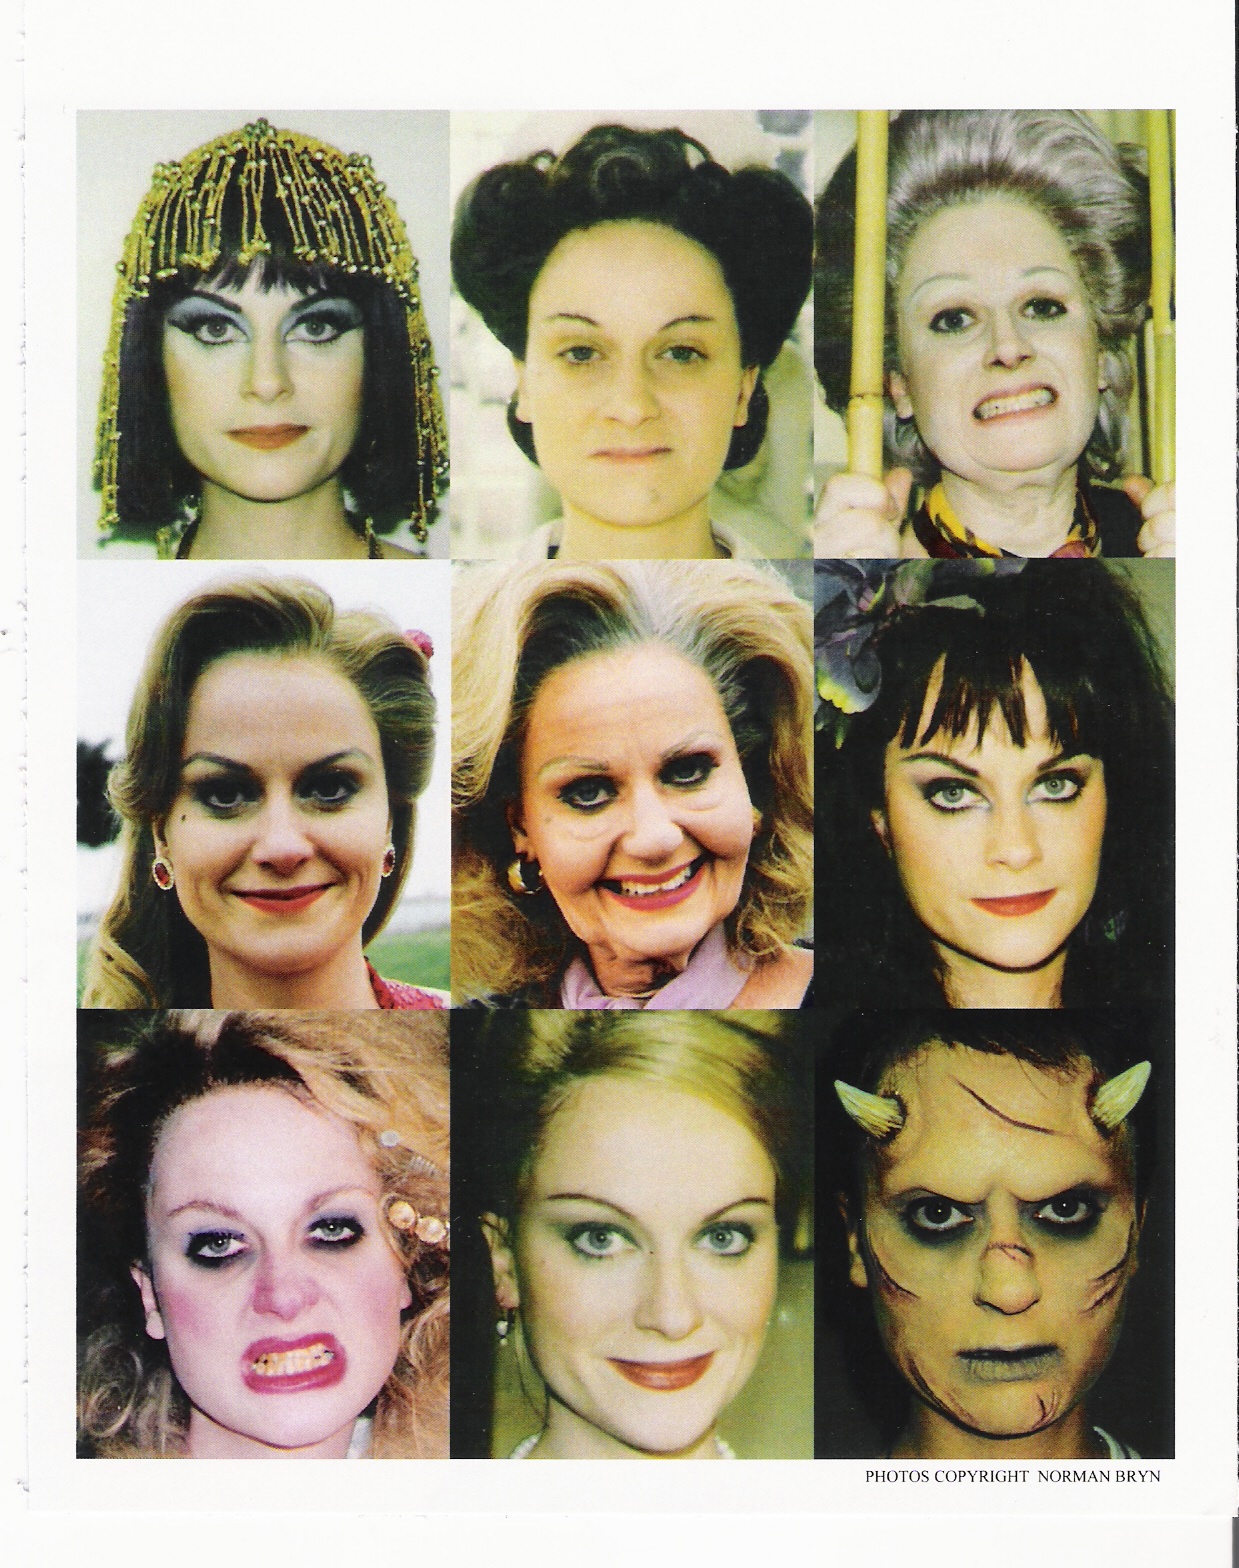 They are ALL Amy Poehler, in makeup by Norman Bryn for Comedy Central's 